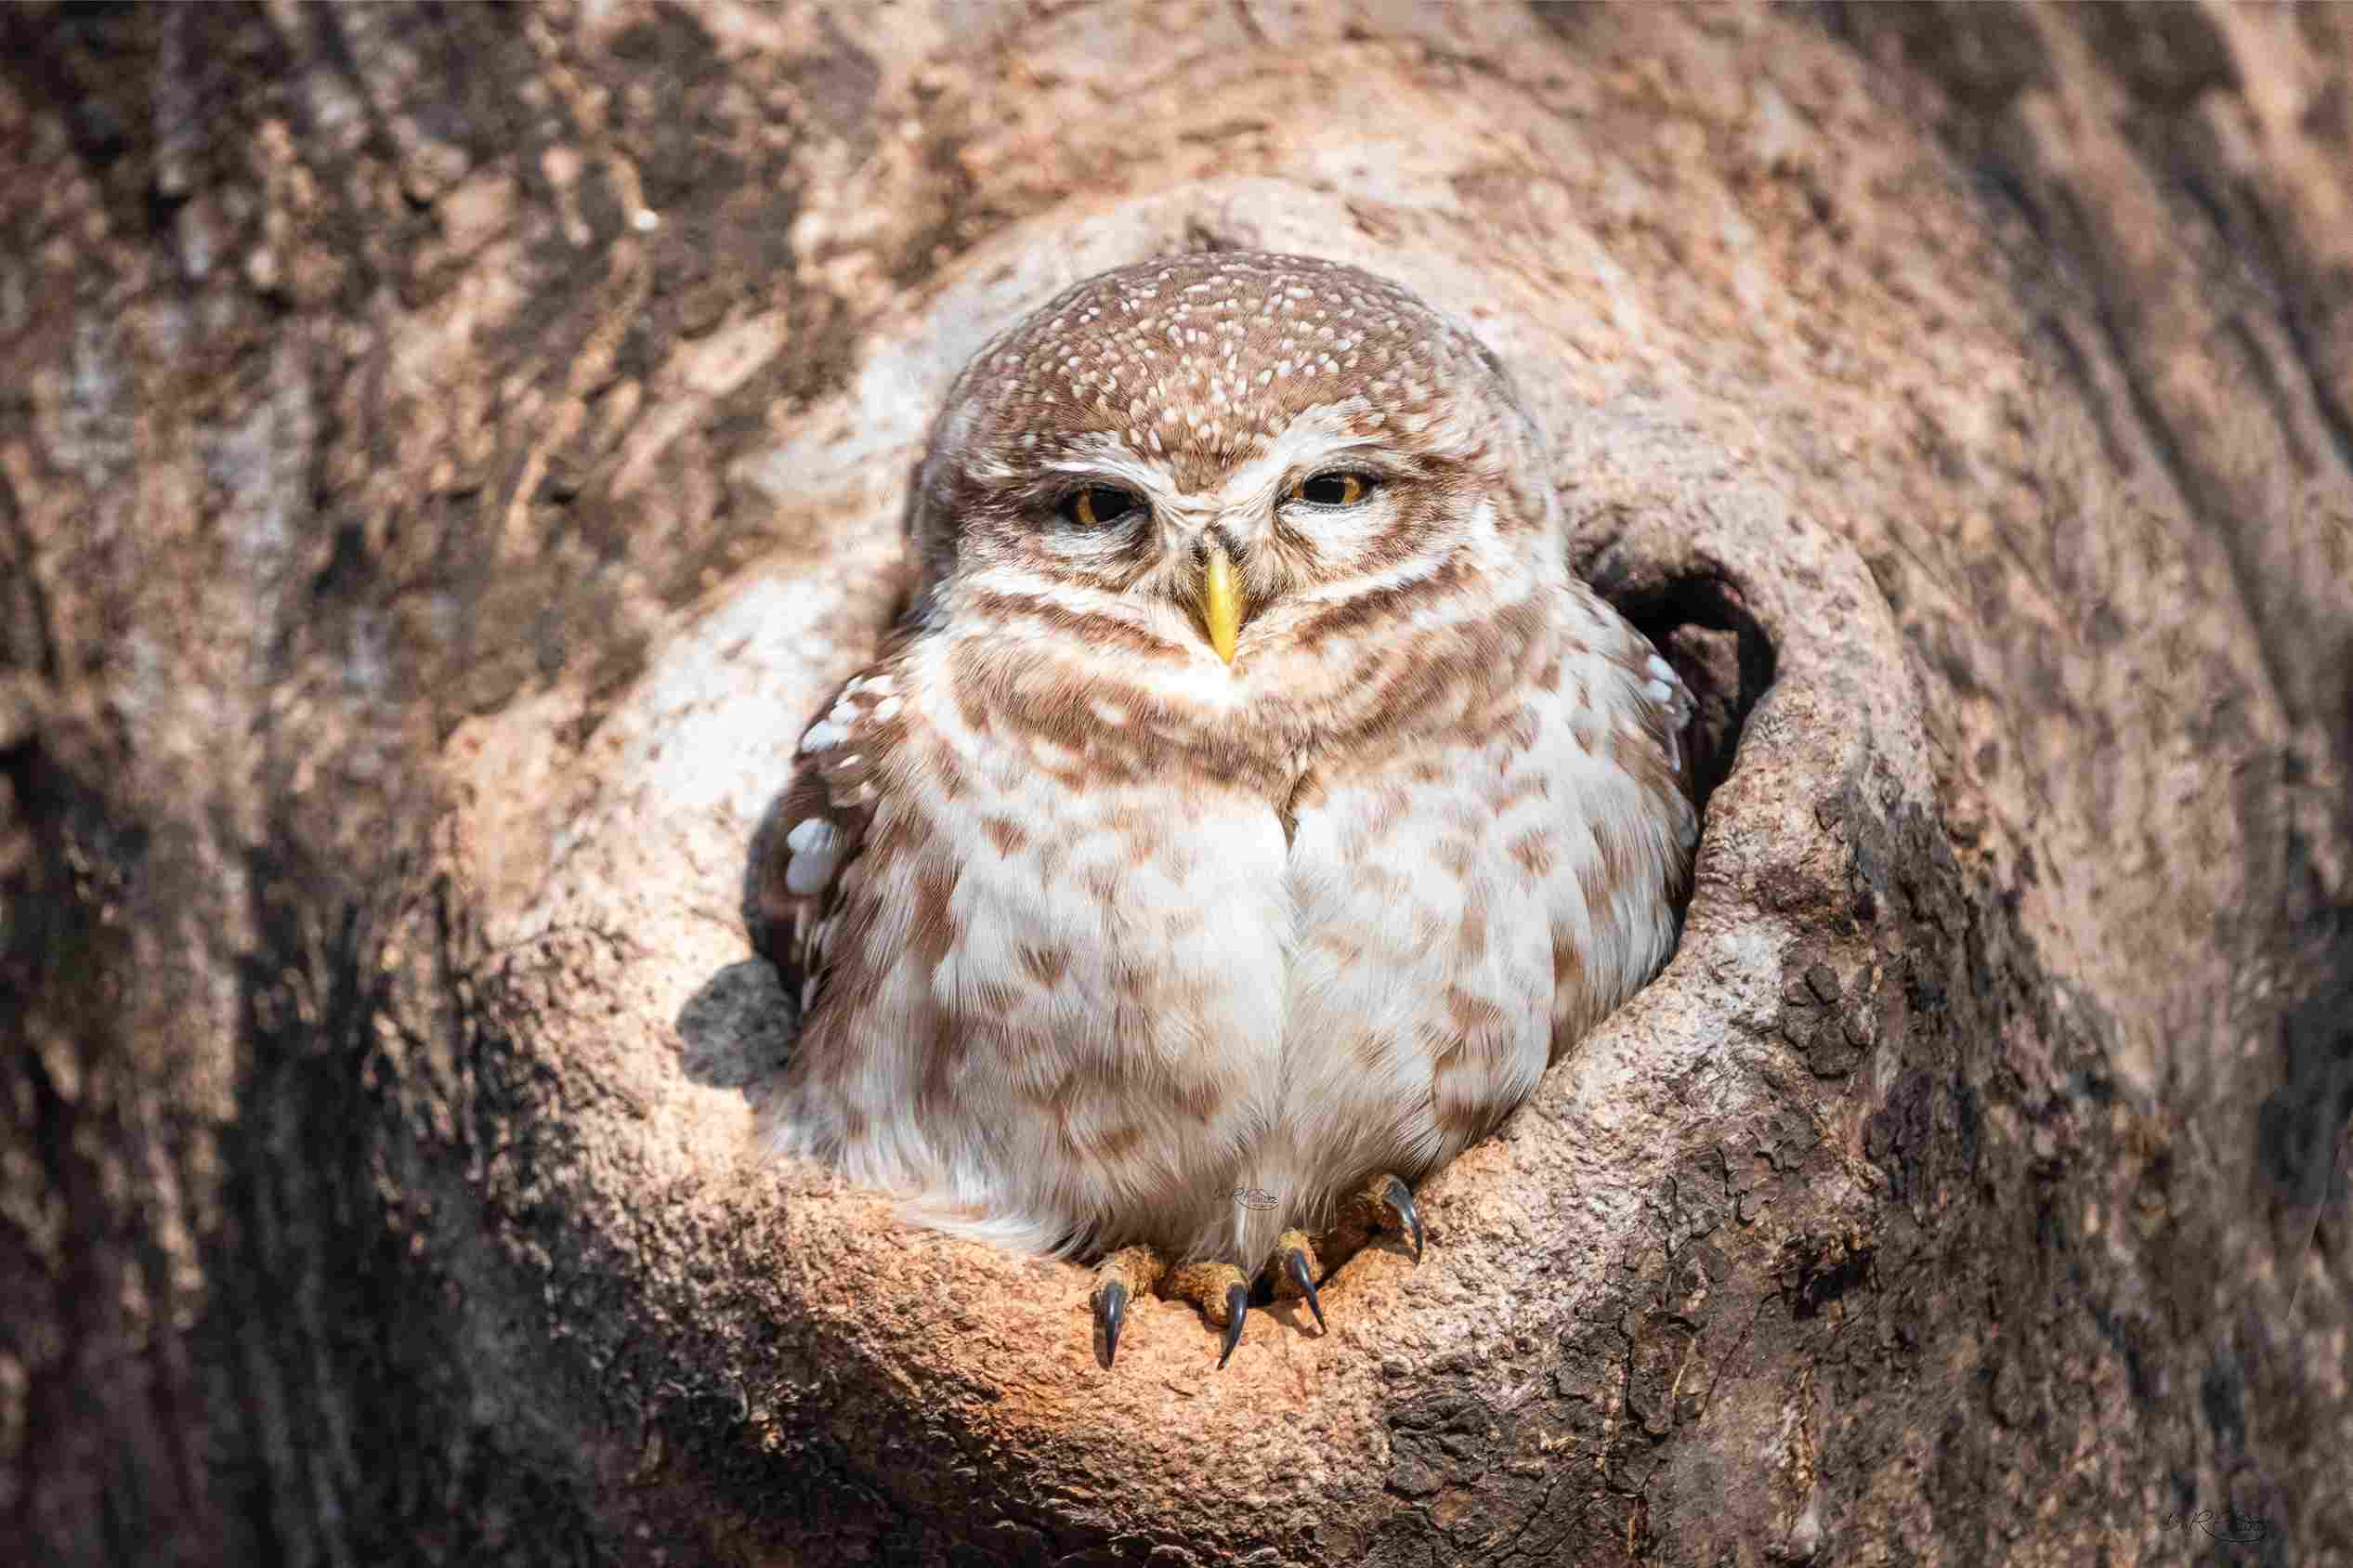 The Spotted Owlet